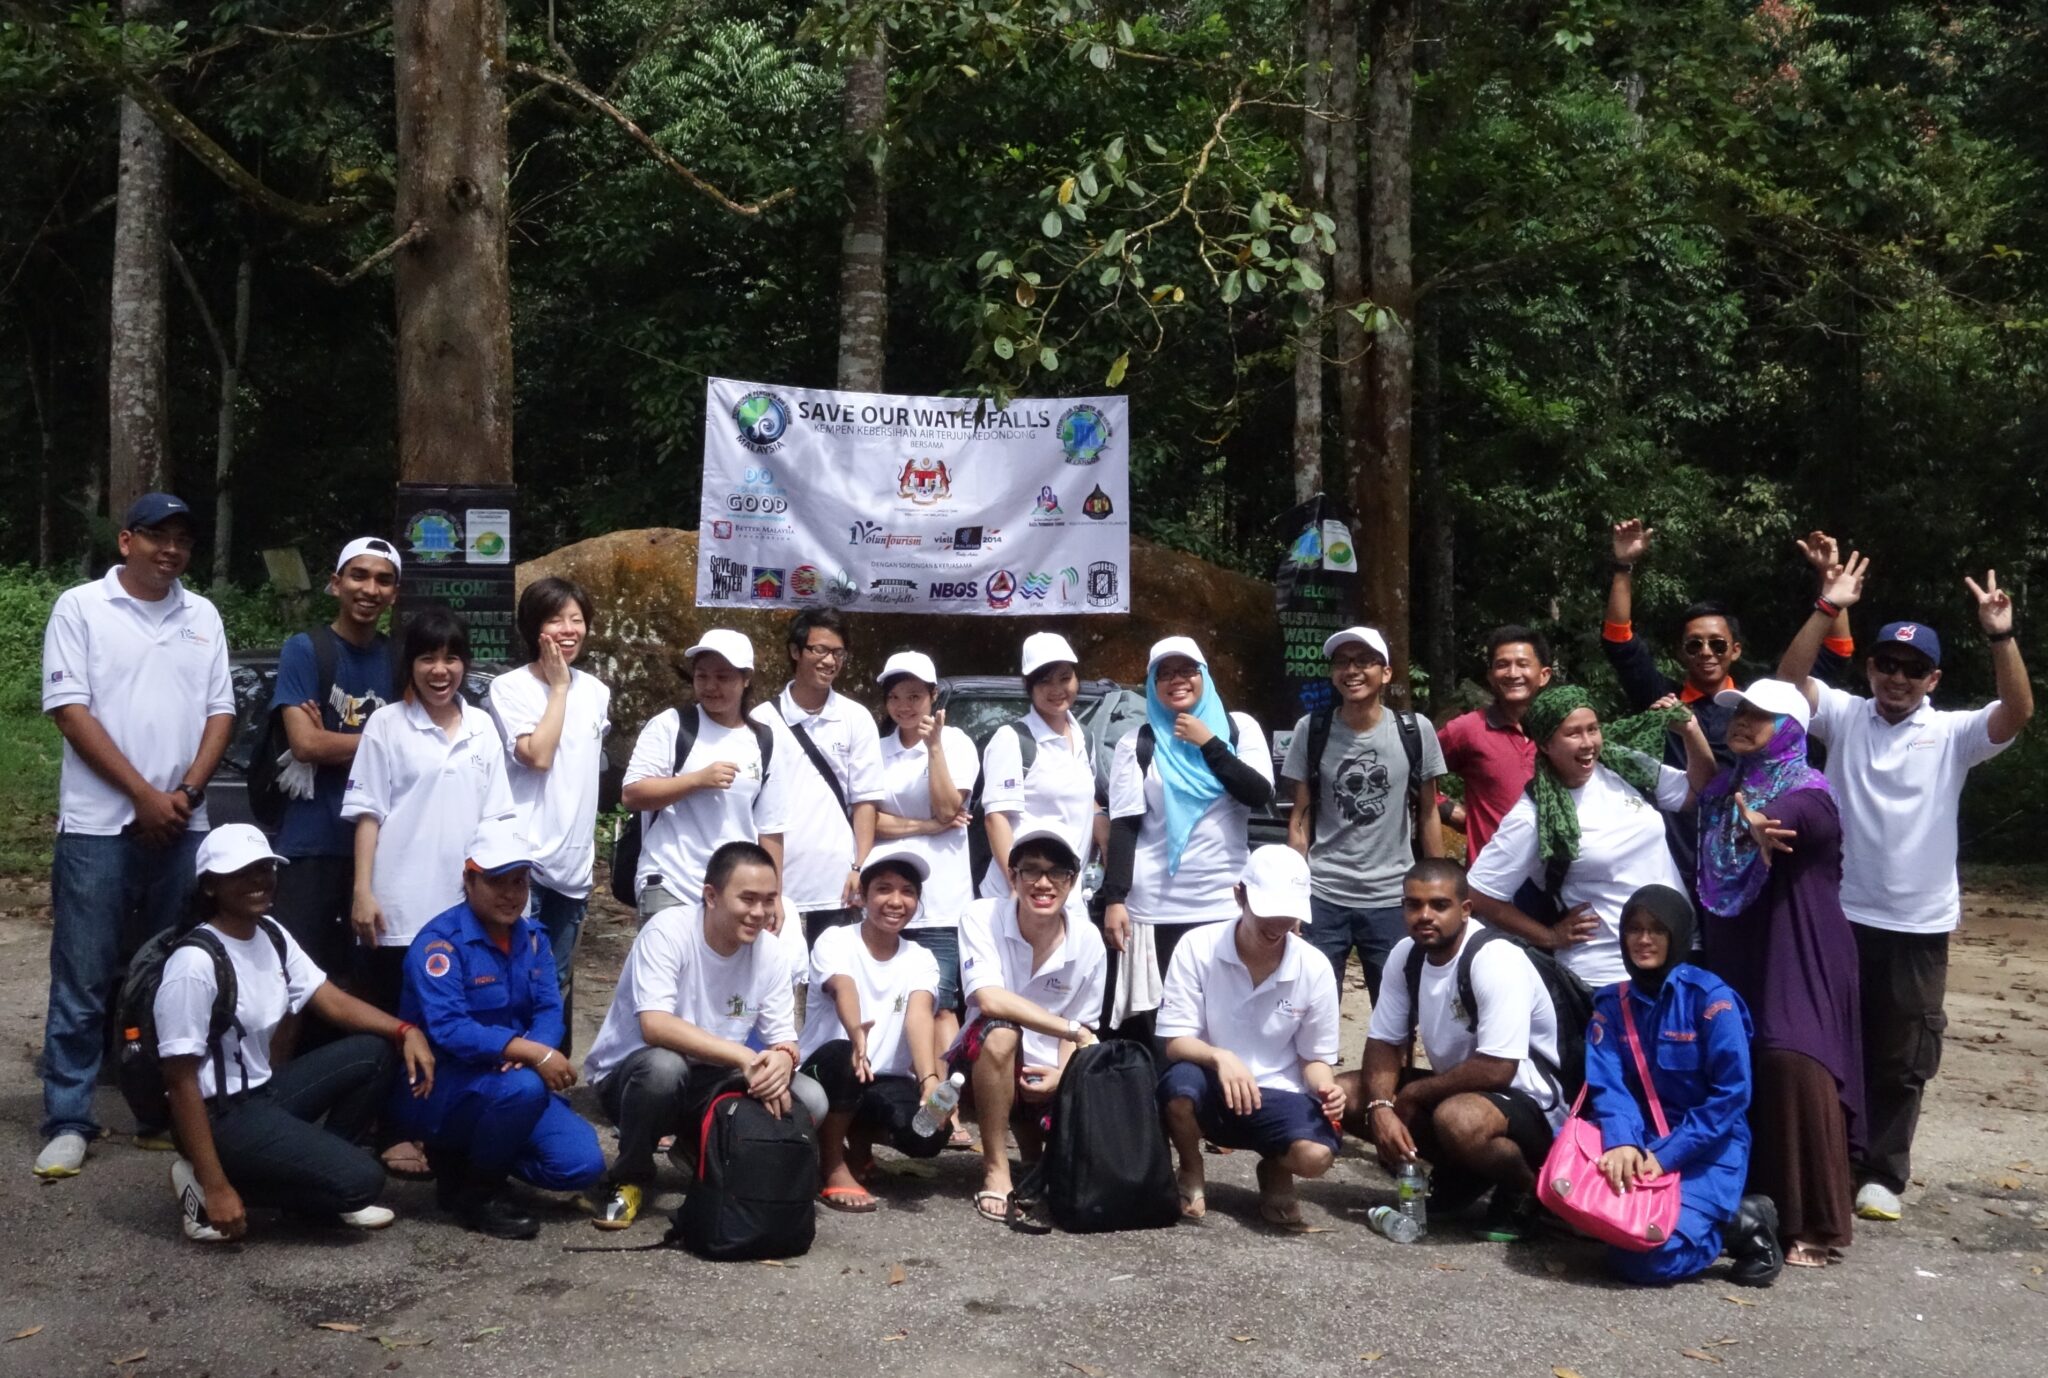 The DSG team with the Waterfall Association!